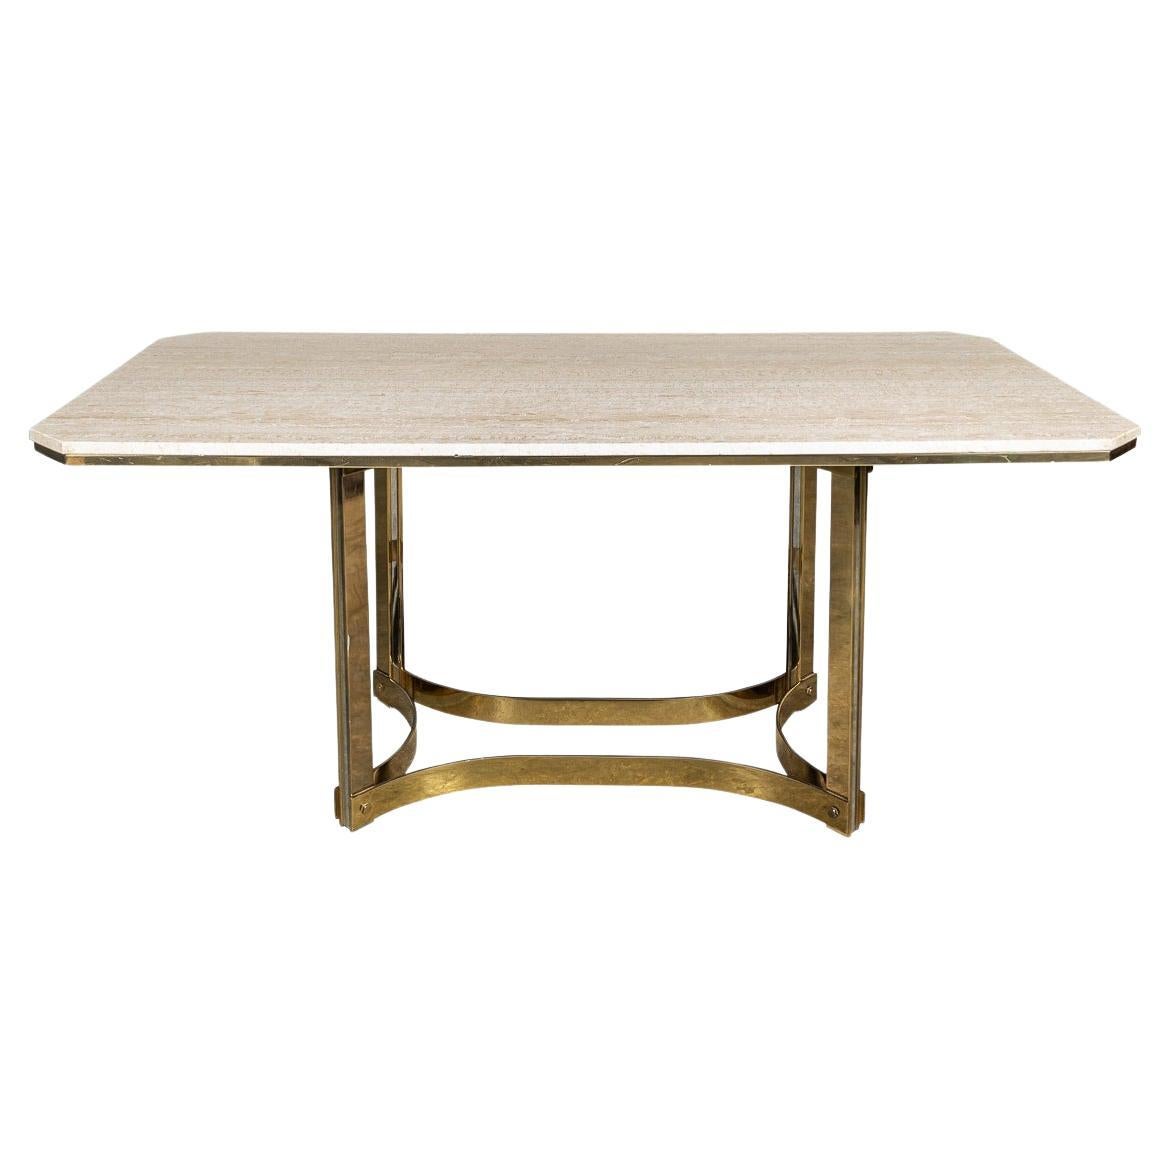 Vintage 20th Century Italian Travertine & Gold Dining Table, Alessandro Albrizzi For Sale